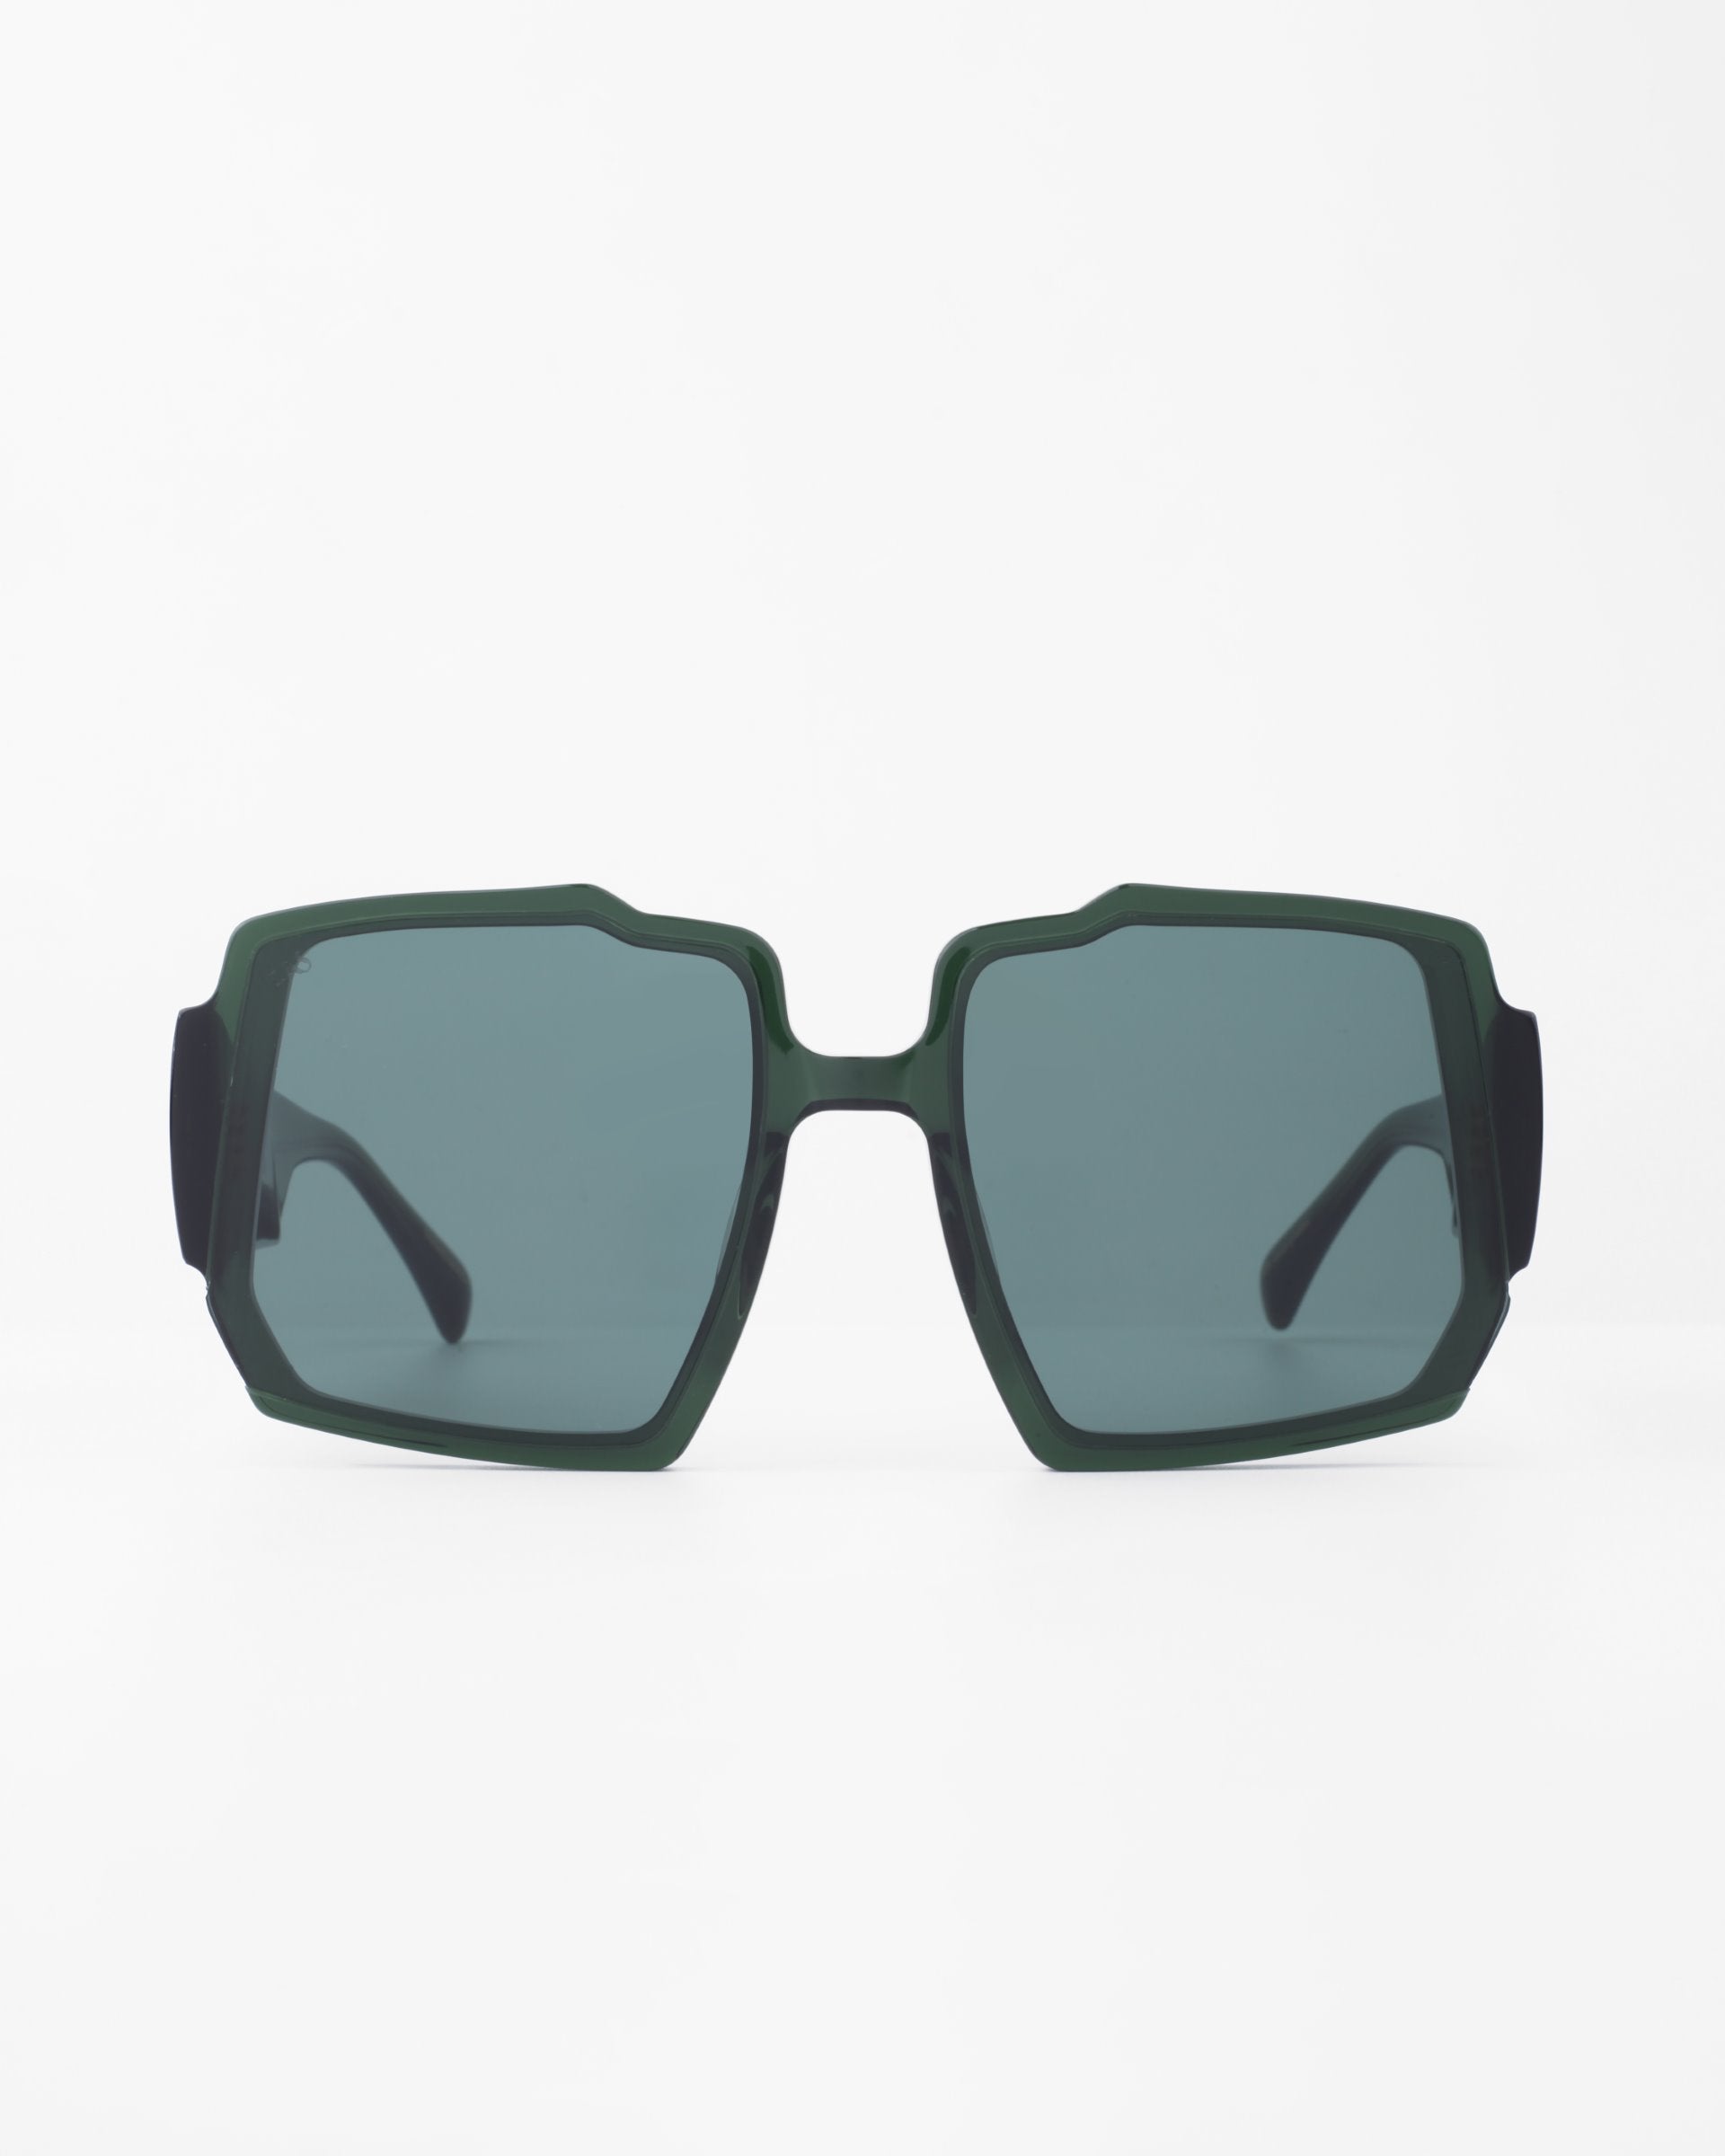 A pair of dark green rectangular sunglasses with blue-tinted, UV-protected lenses. The oversized frames, featuring a chunky acetate frame and black temples, boast a bold, angular design. The Moritz by For Art's Sake® stands out against the plain white background.